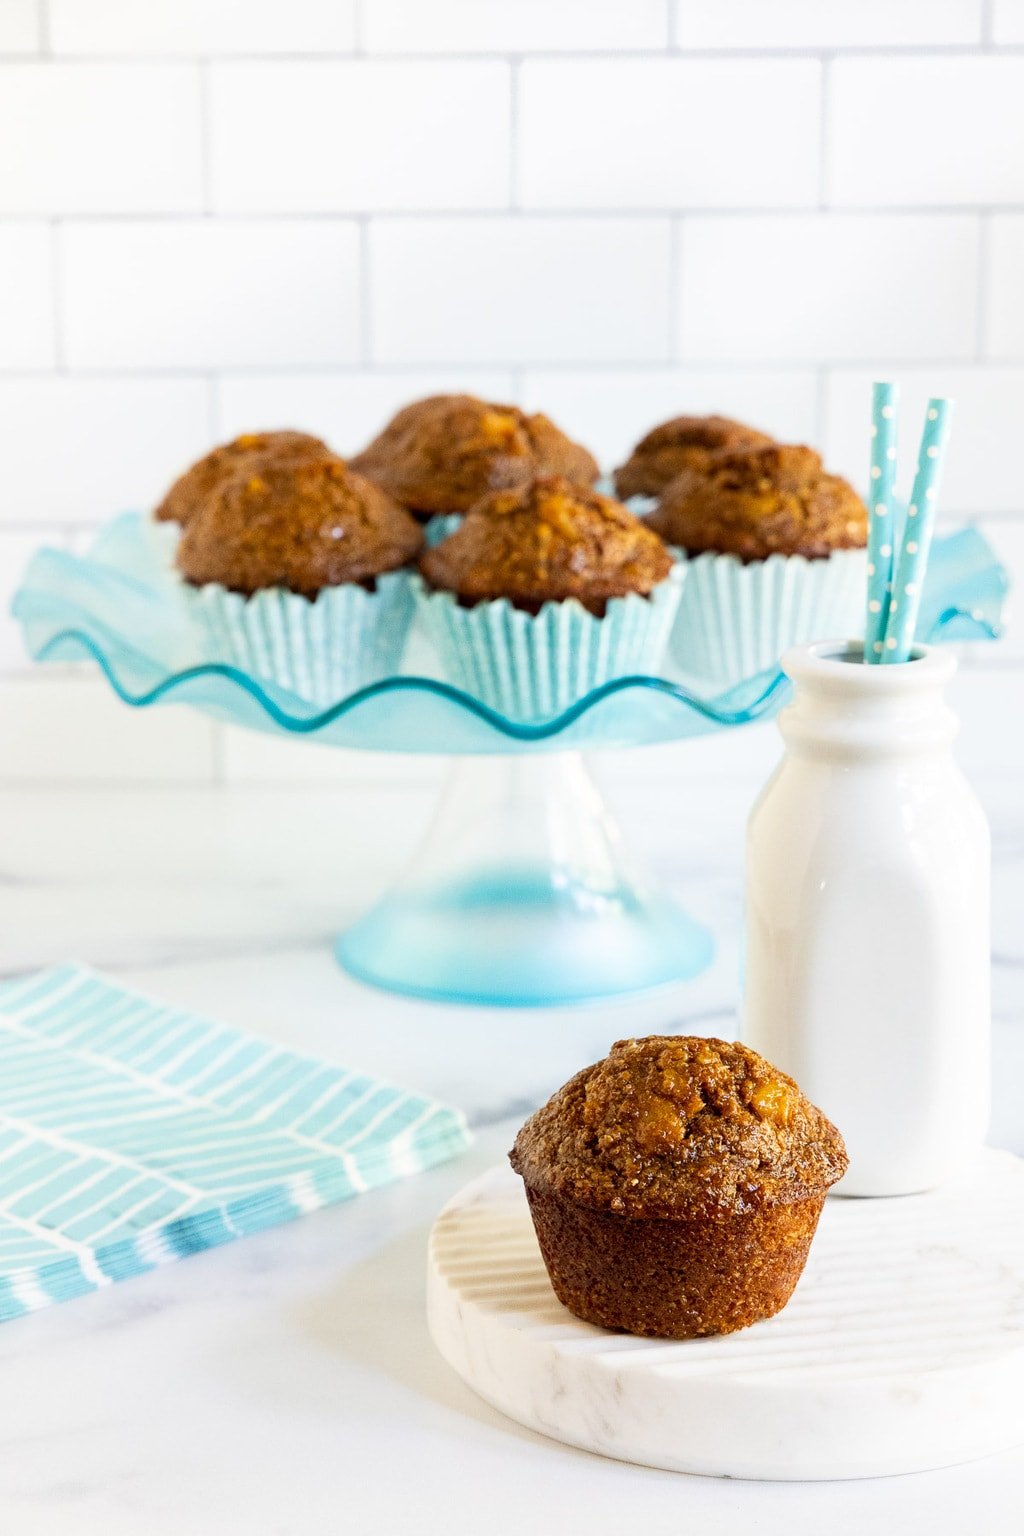 Vertical photo of Honey-Glazed Pineapple Coconut Bran Muffins on a turquoise glass pedestal cake stand.